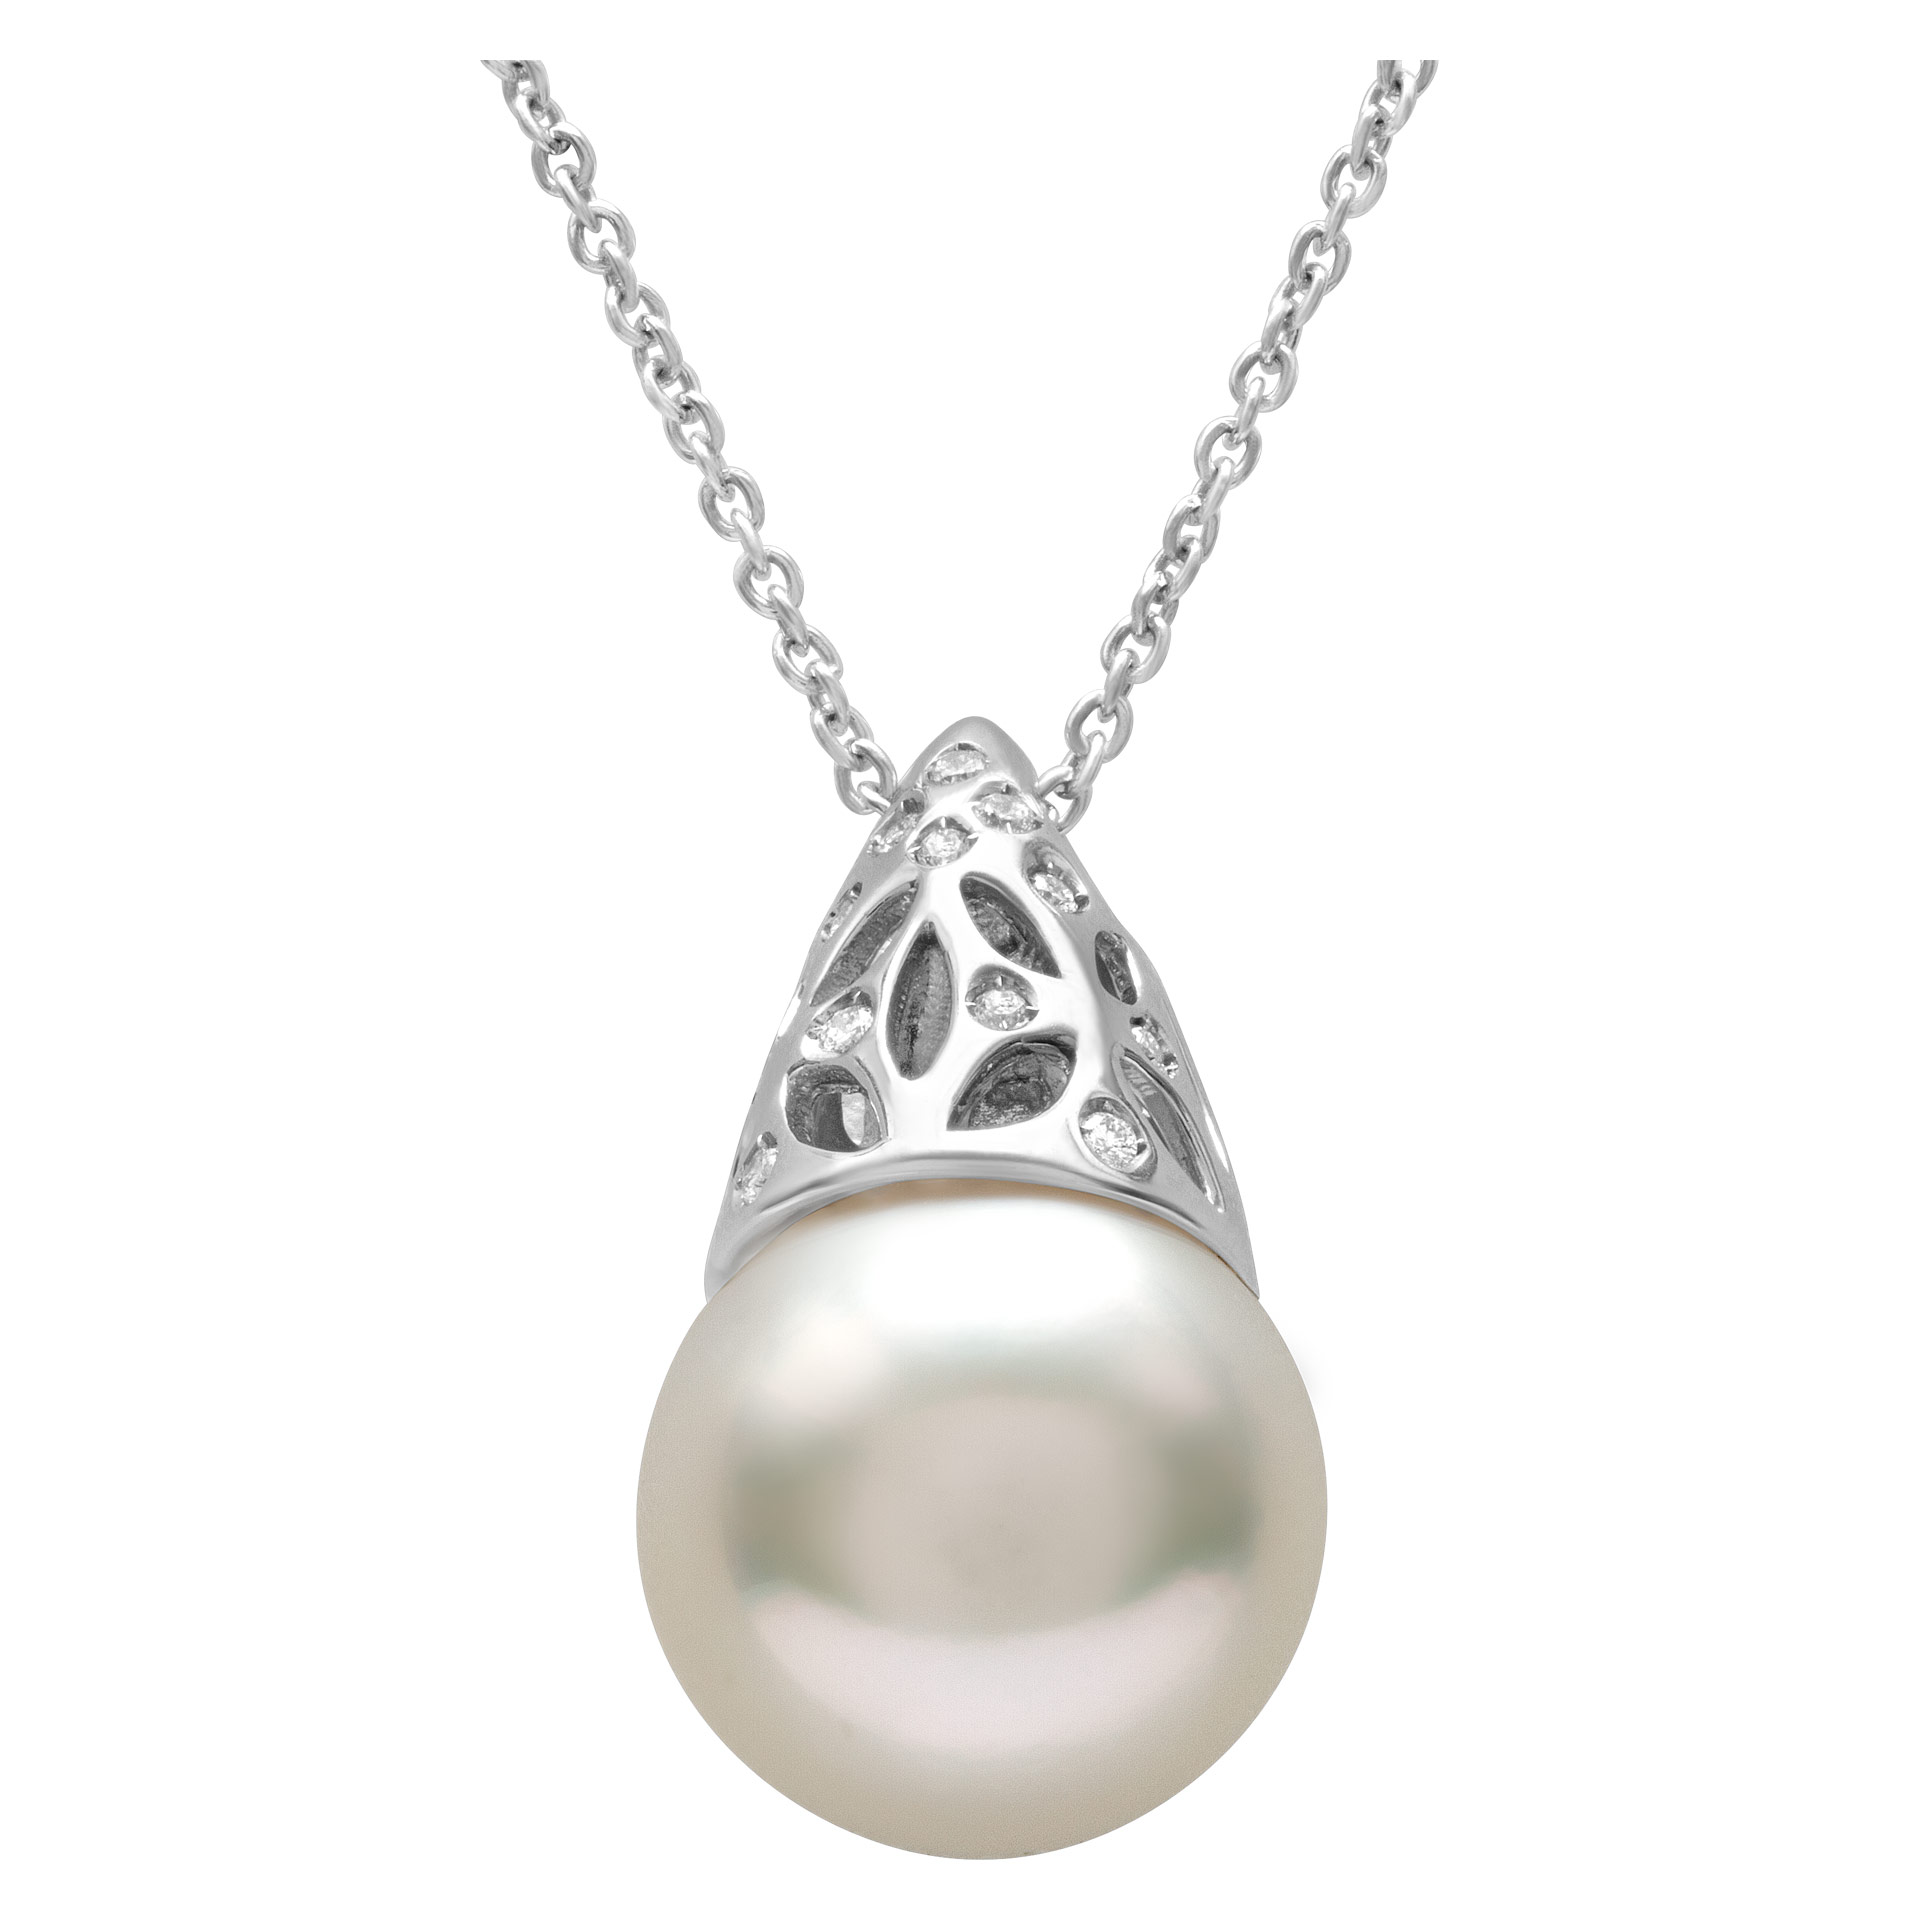 12.1mm South Sea Pearl necklace